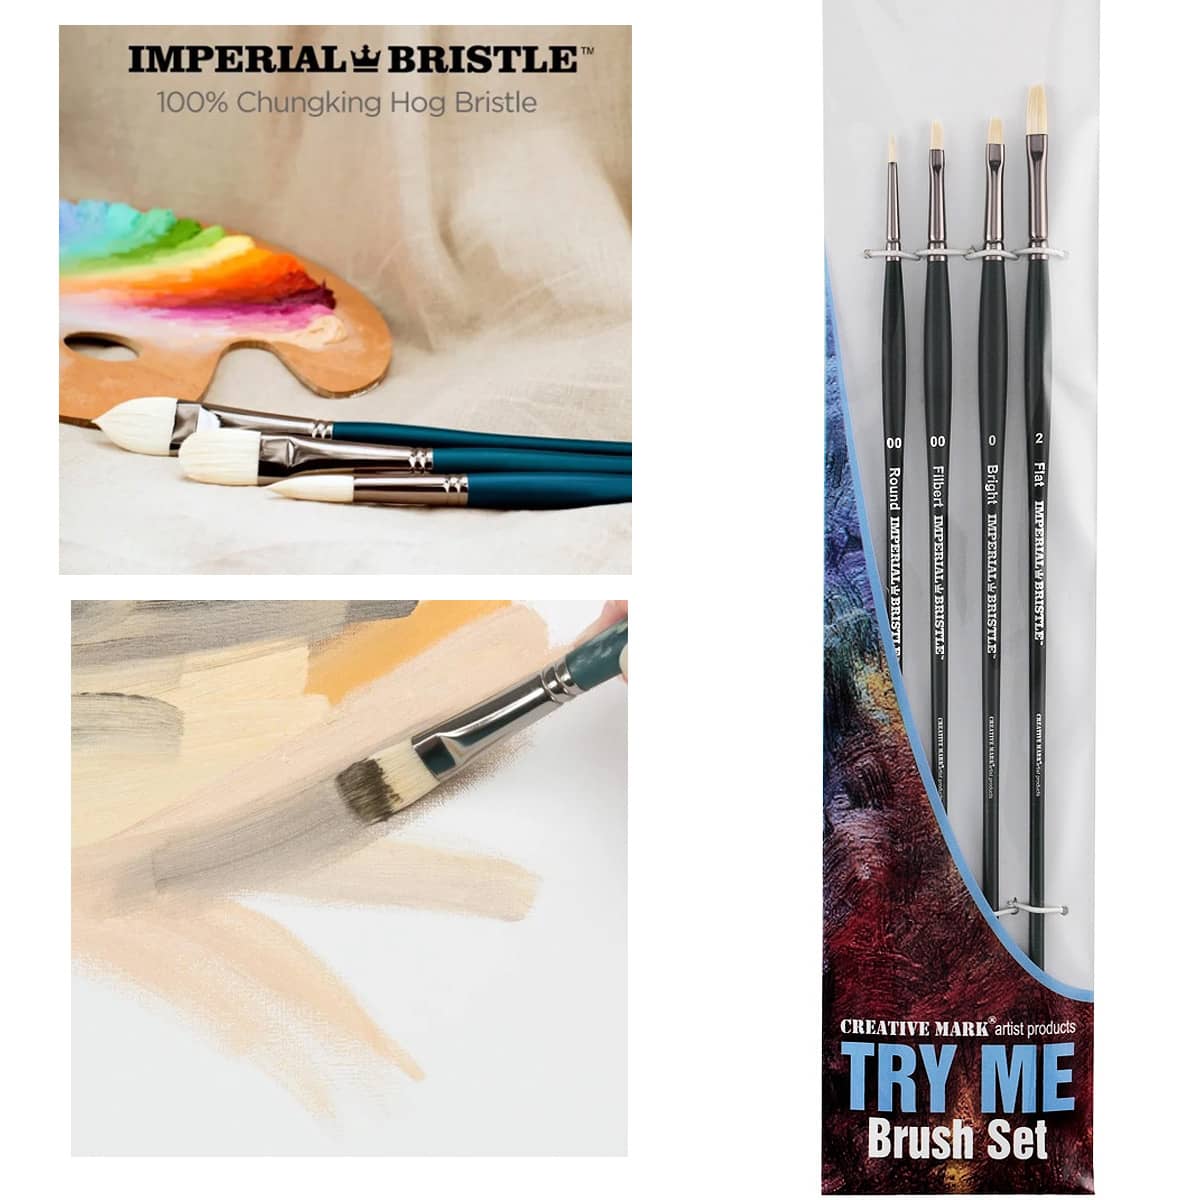 Try Me Set of Imperial Bristle Brushes Set of 4